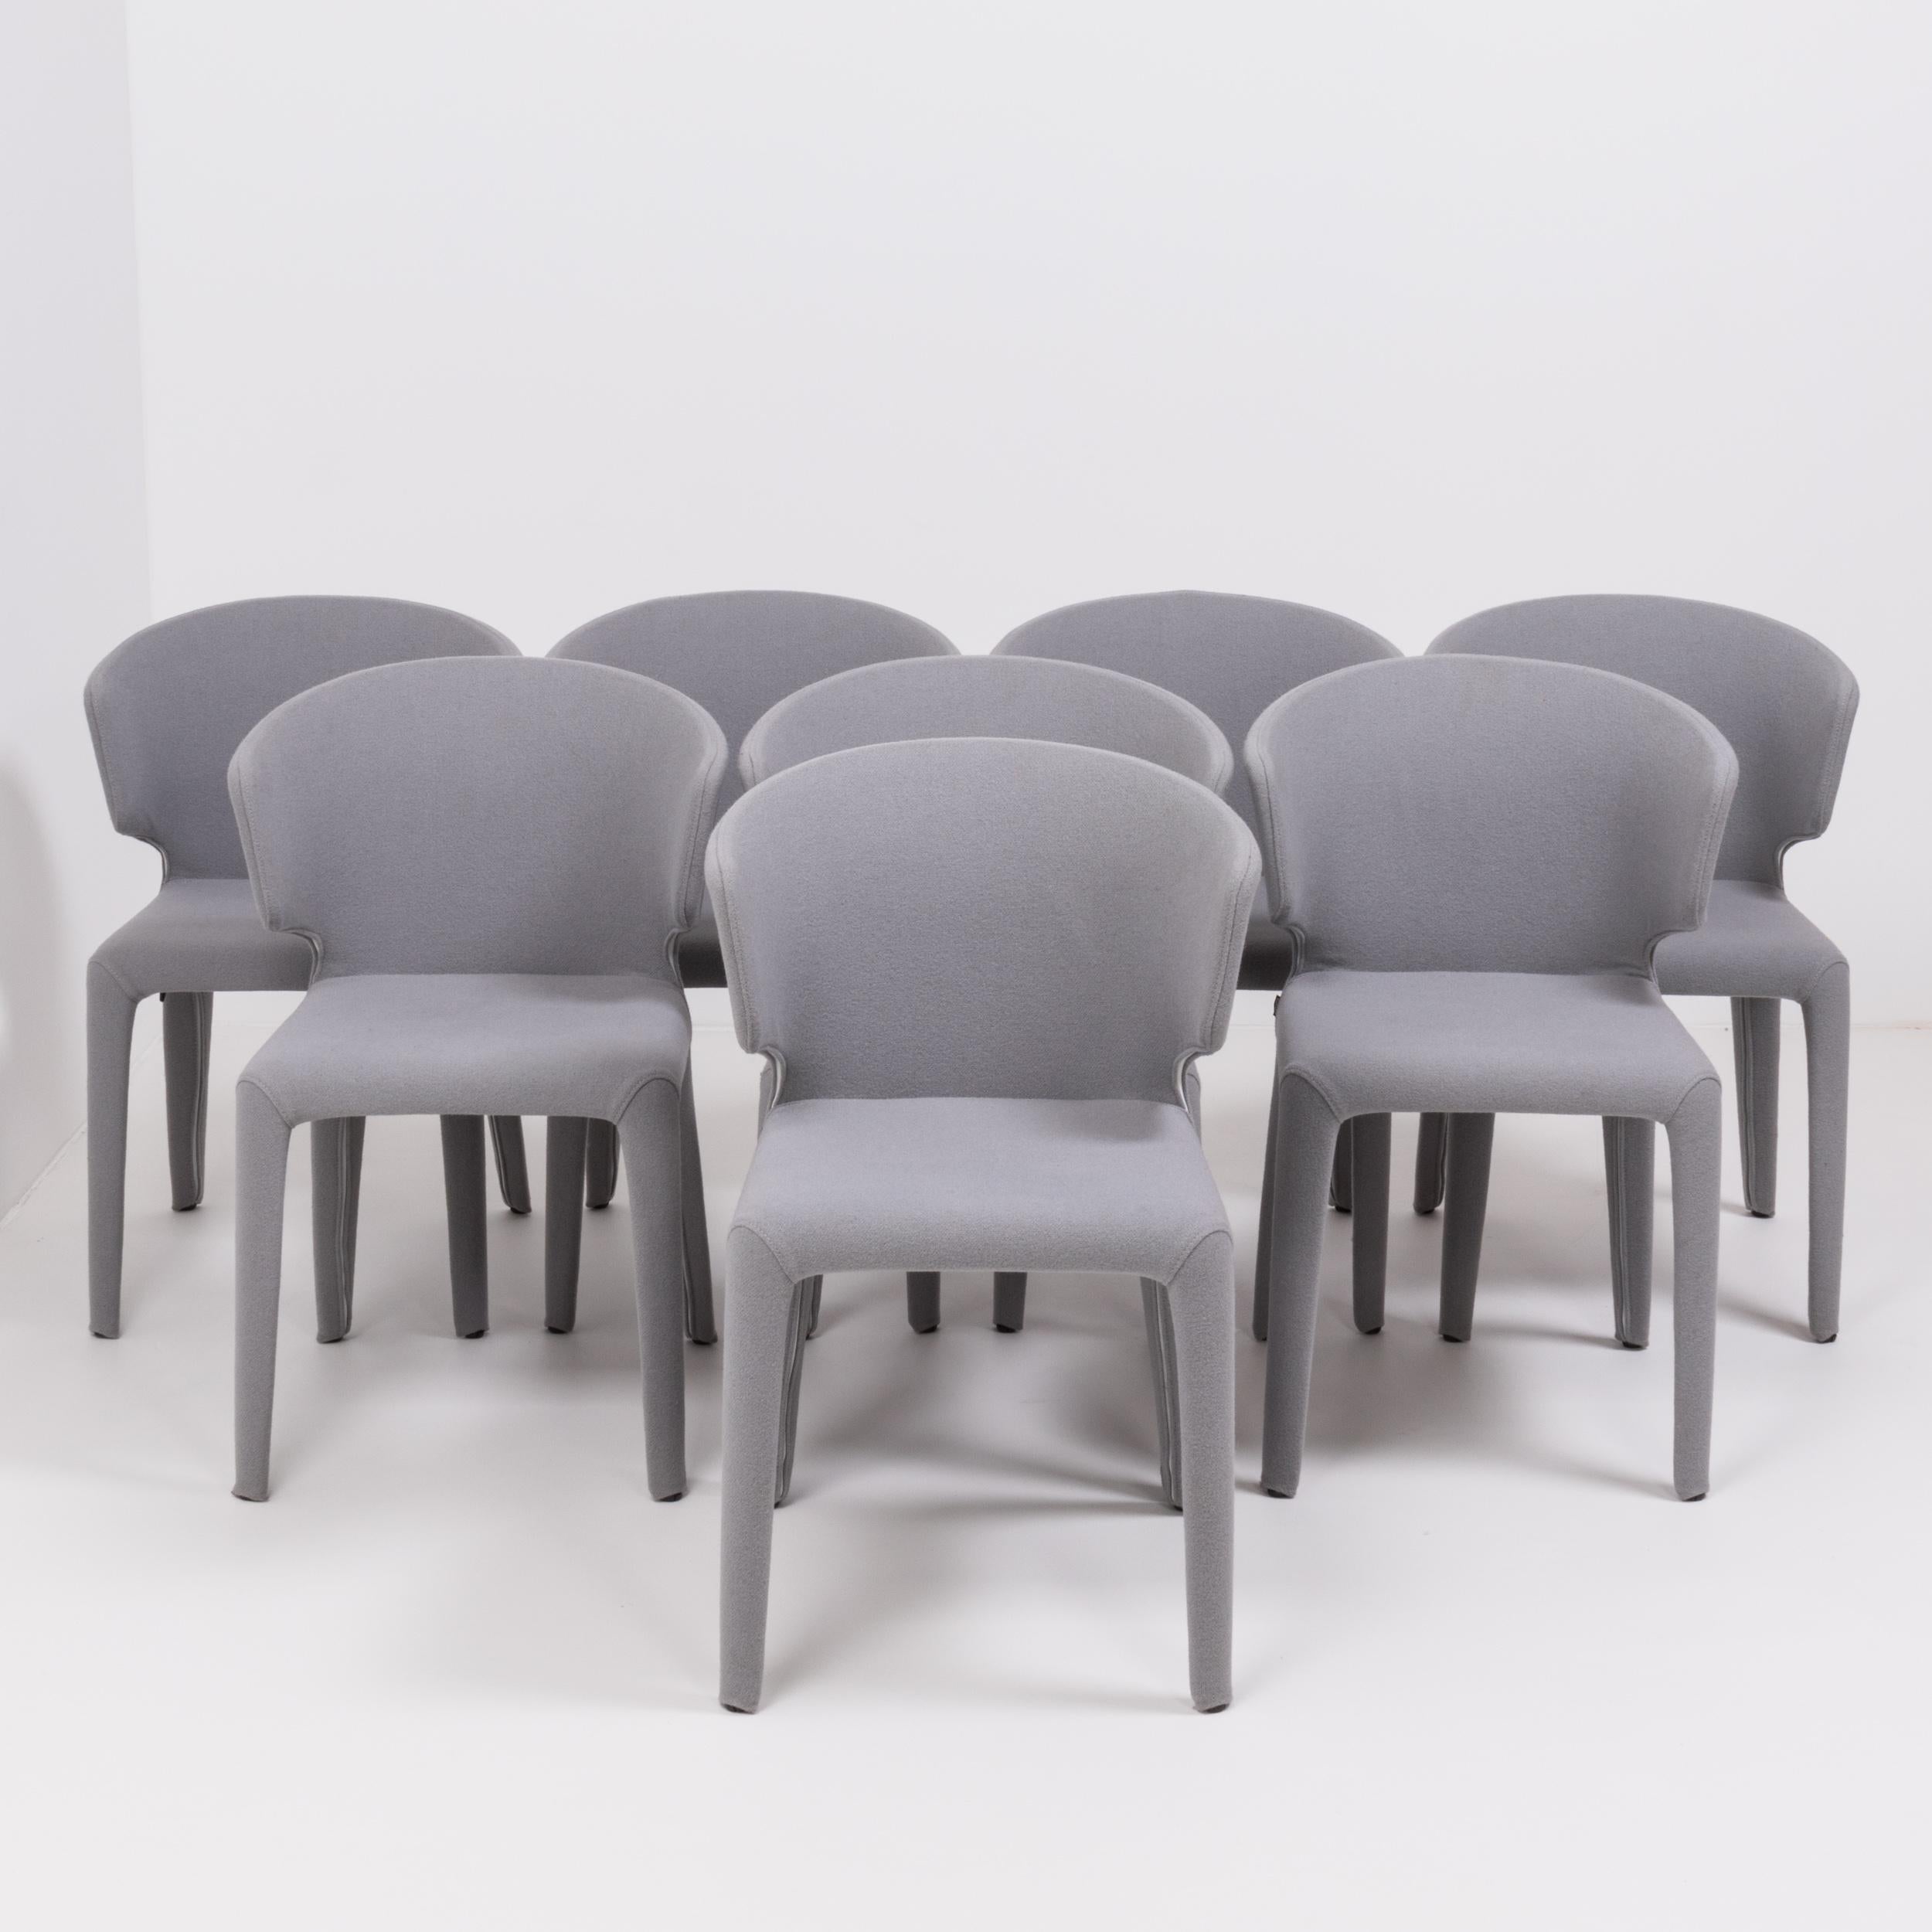 Designed by Hannes Wettstein for Cassina in 2003, these 367 Hola chairs have a sleek, contemporary silhouette.
 
The set of eight chairs are in excellent, nearly new condition and are fully upholstered in grey wool with zips that allow the covers